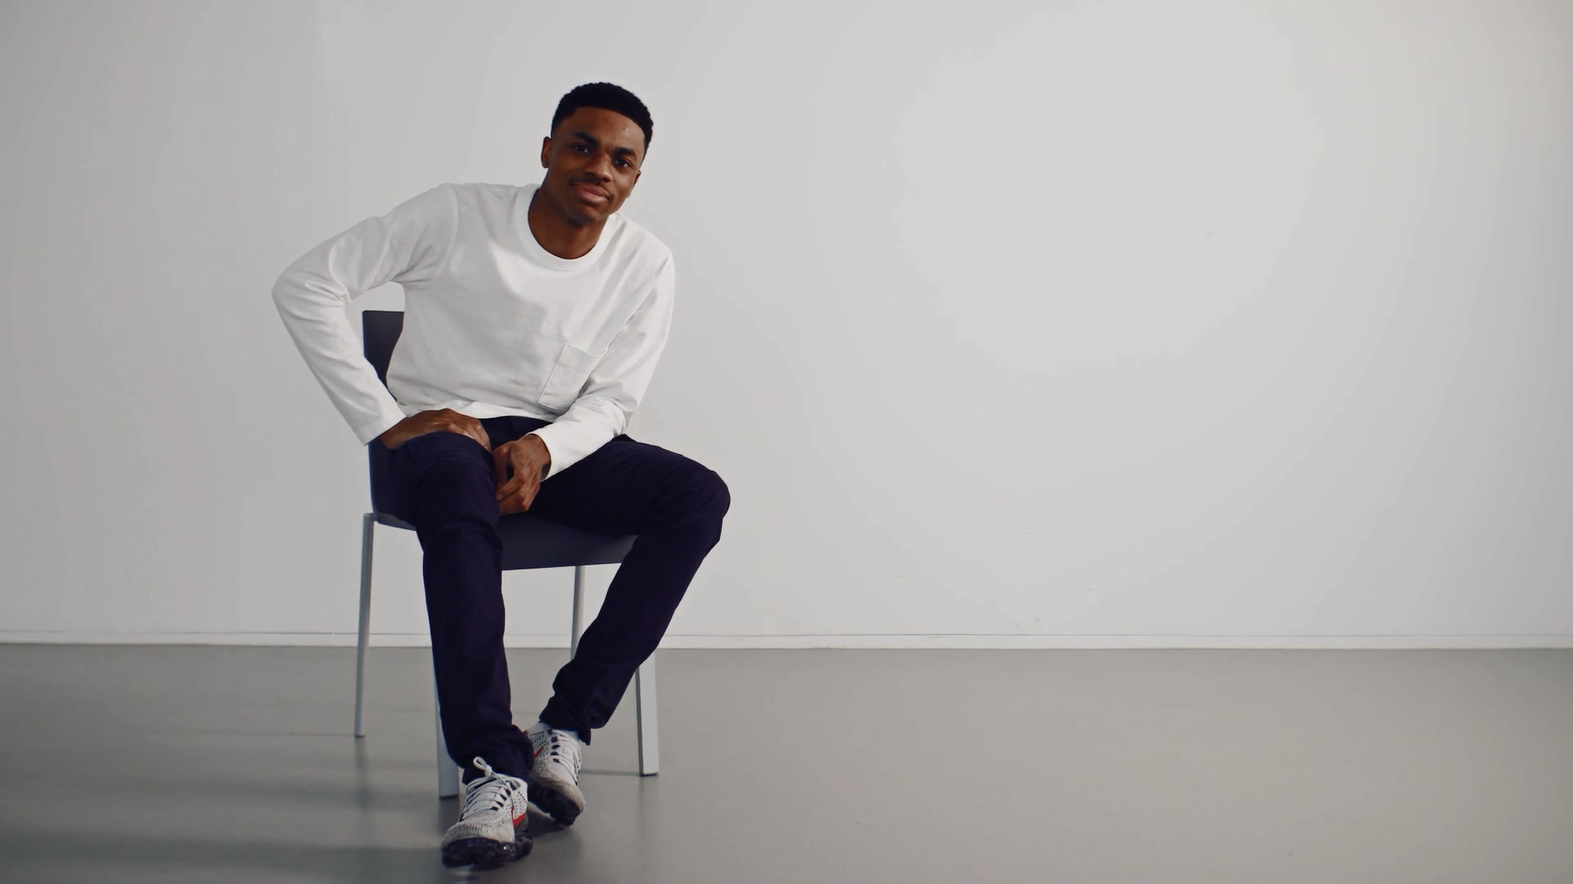 Vince Staples has a message on new single: “Get The F*ck Off My D*ck”